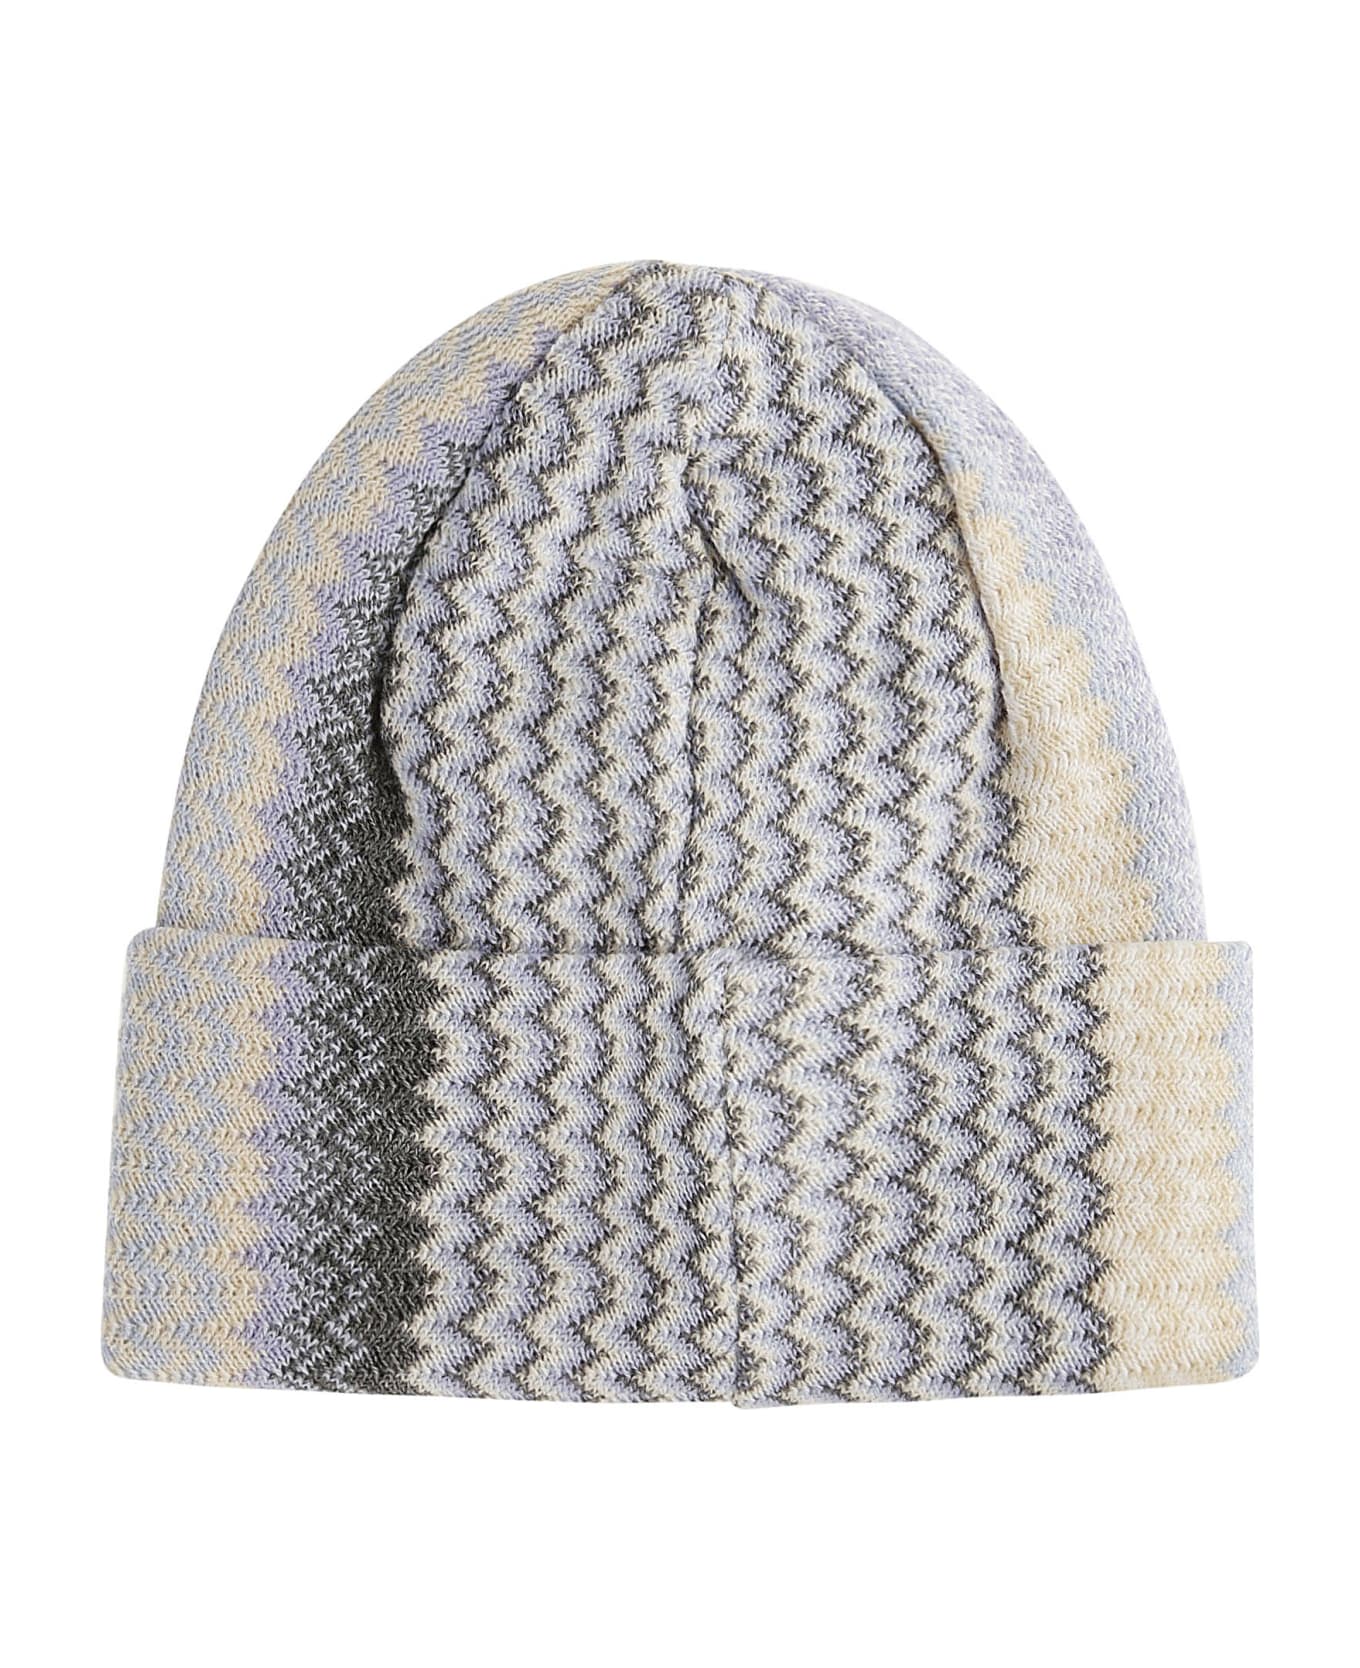 Missoni Zigzag Woven Knitted Beanie